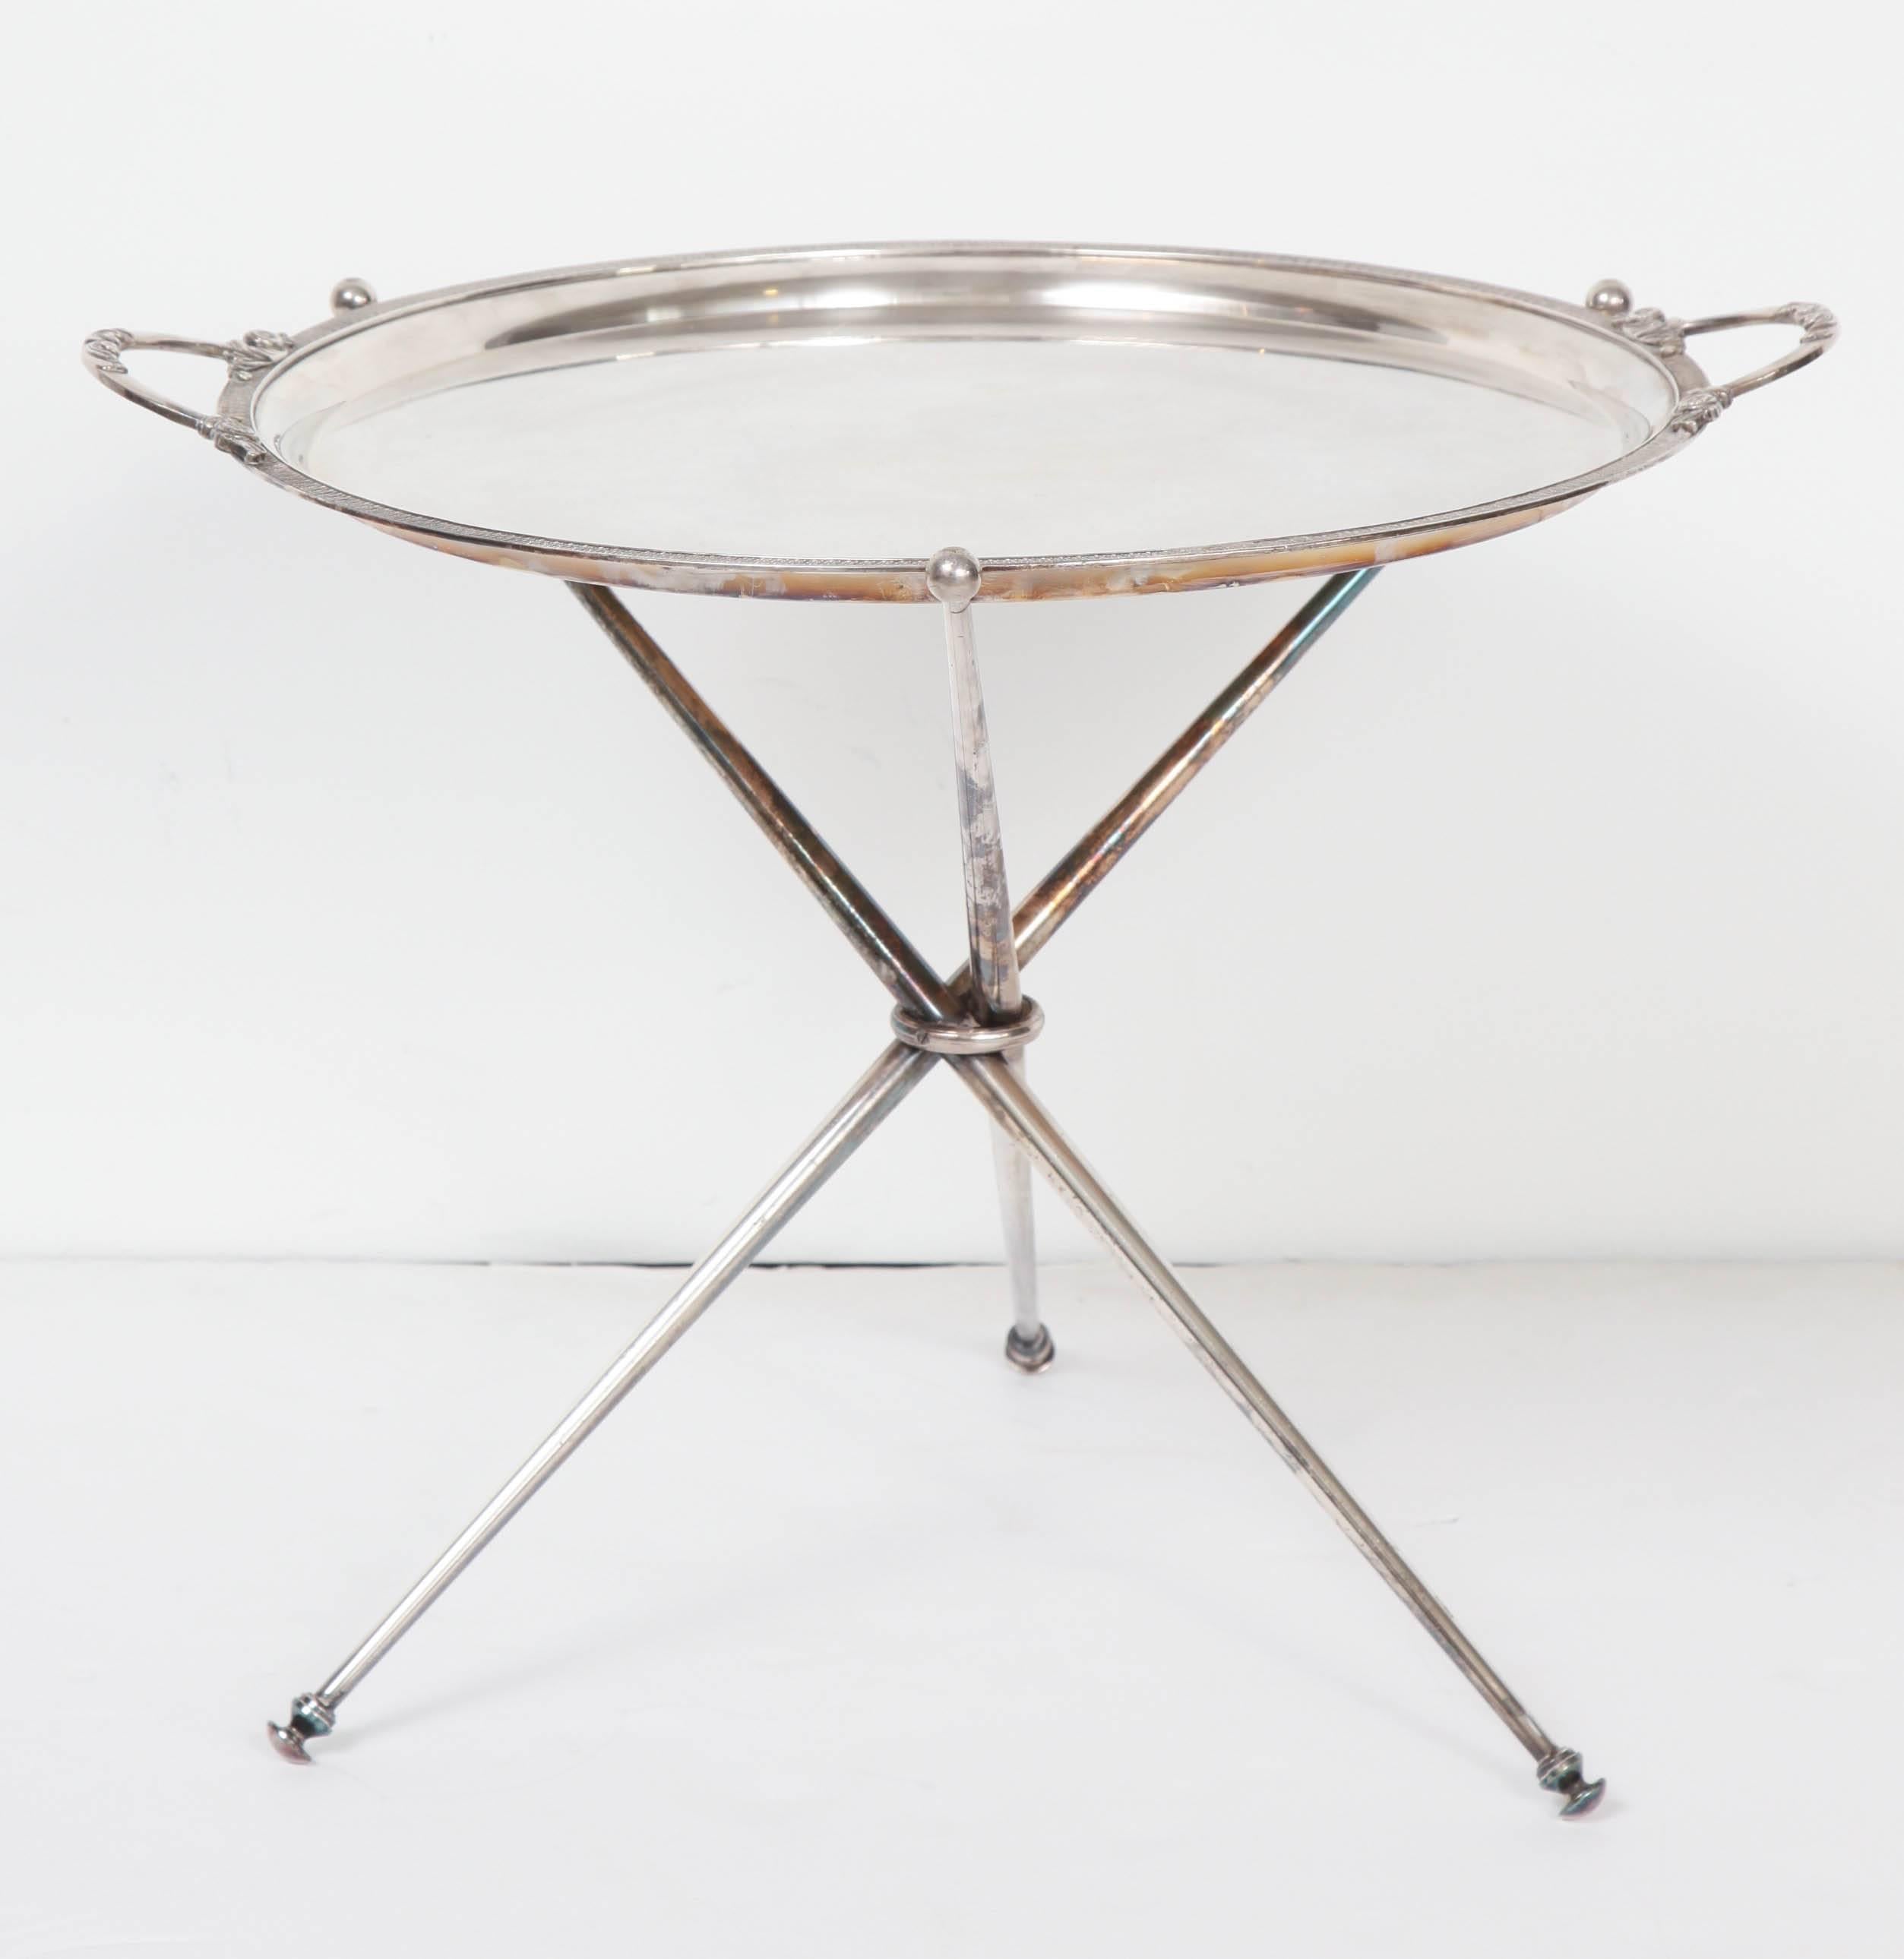 A chic little silver plate tray with handles on a stand--perfect for a cocktail or a cup of tea!